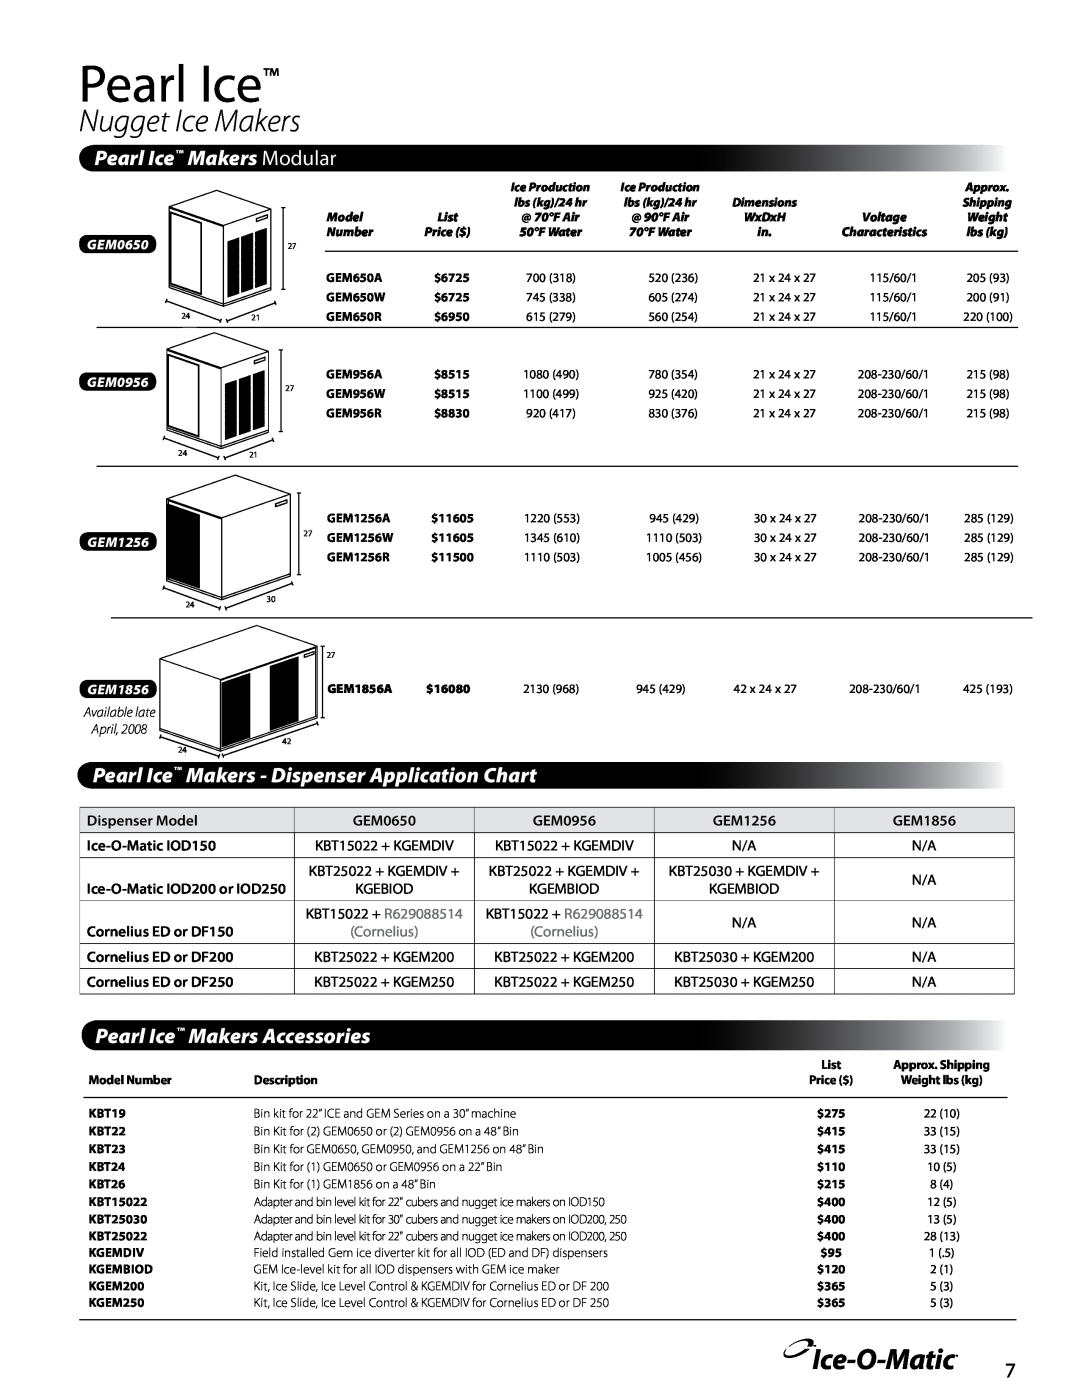 Ice-O-Matic KGEM250, KBT23 Pearl Ice Makers Modular, Pearl Ice Makers - Dispenser Application Chart, Nugget Ice Makers 